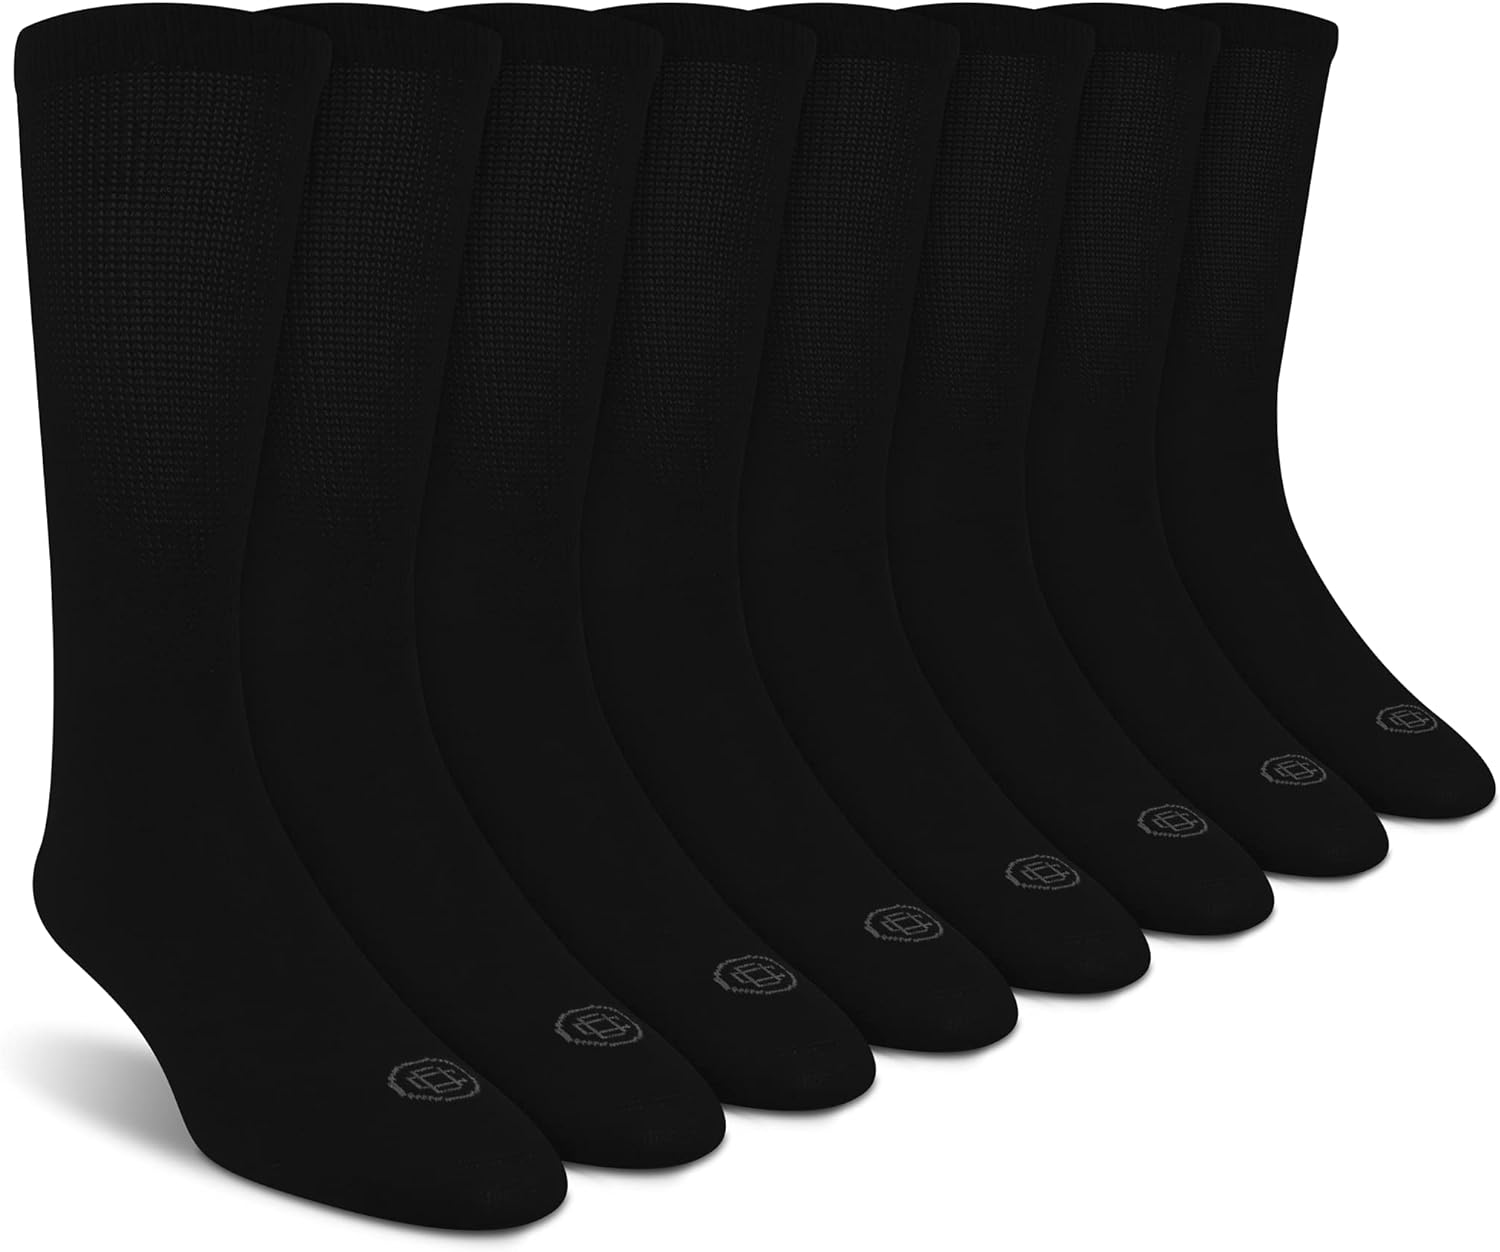 Doctor's Choice Diabetic Socks for Men, Seamless Crew Socks with Non-Binding Top, 4-Pairs, Large 10-13 & X-Large 13-15